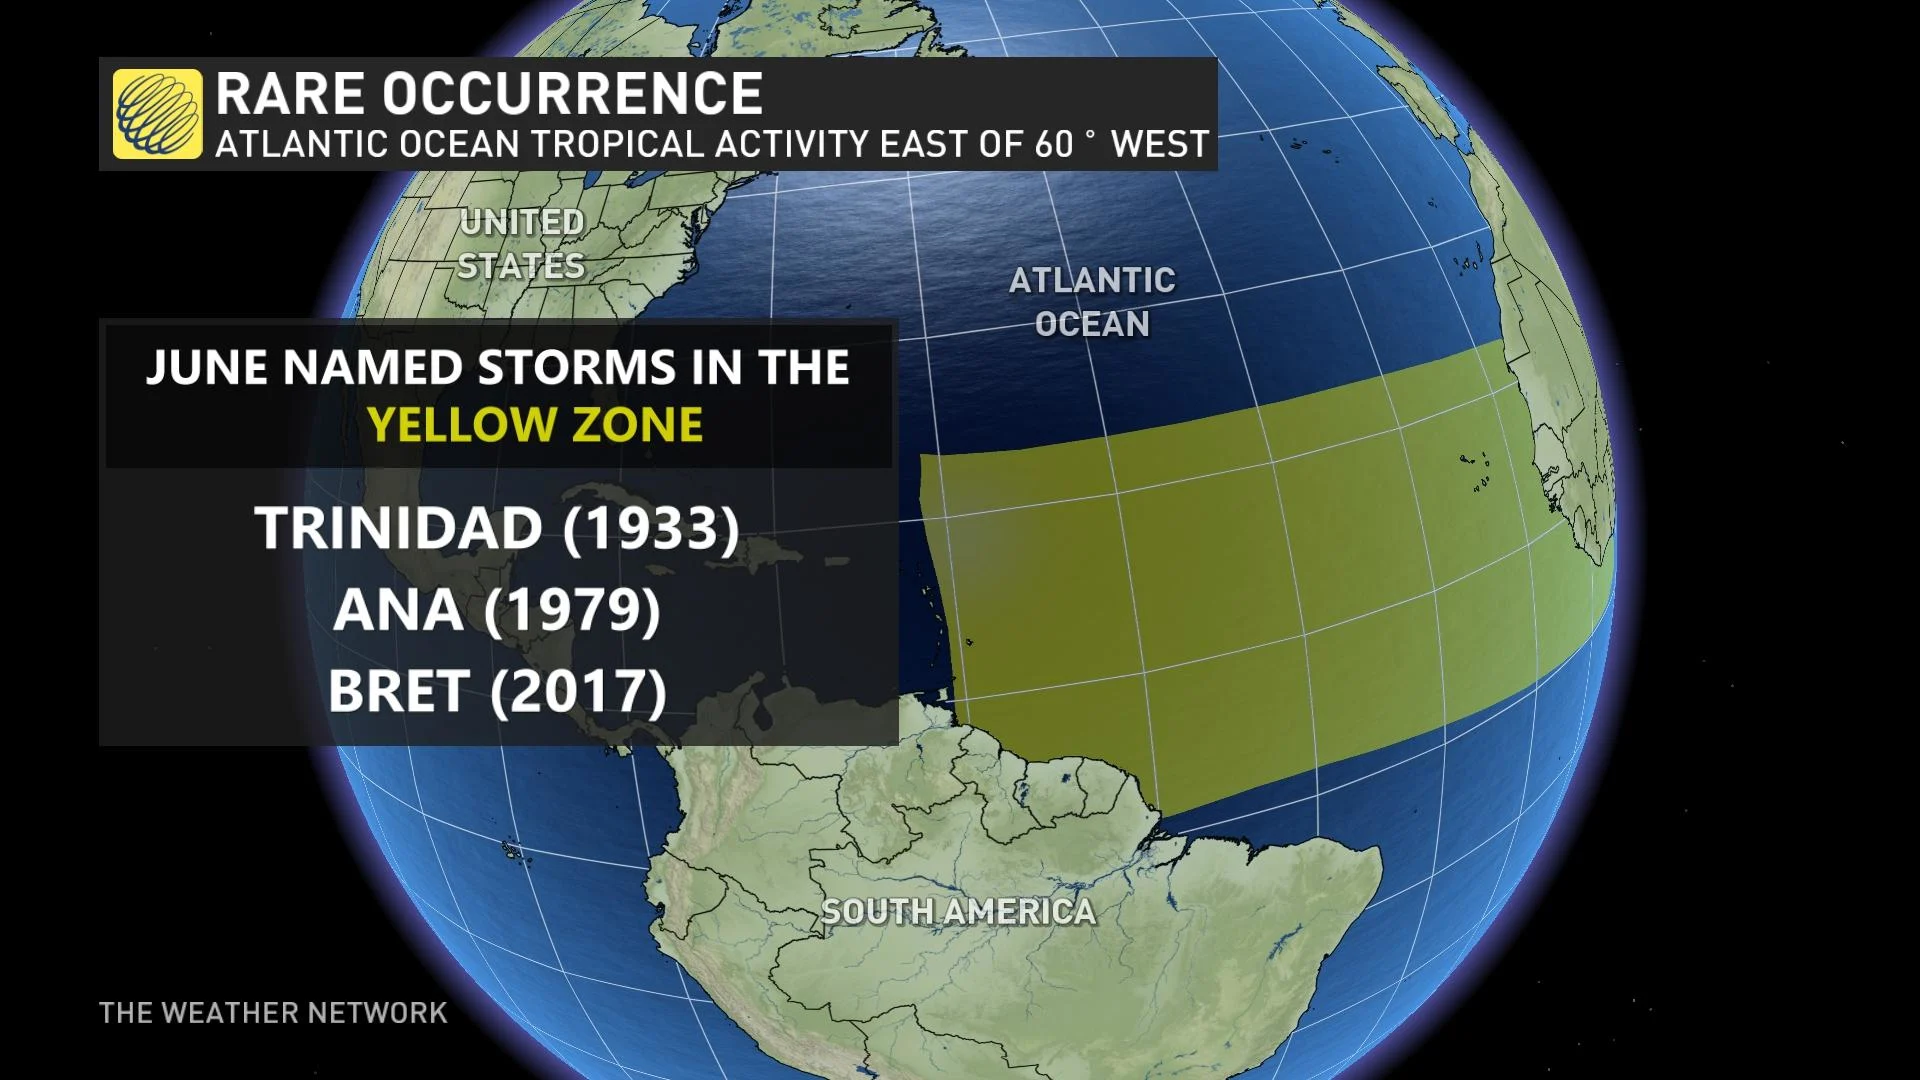 June Tropical Storms East of 60° West